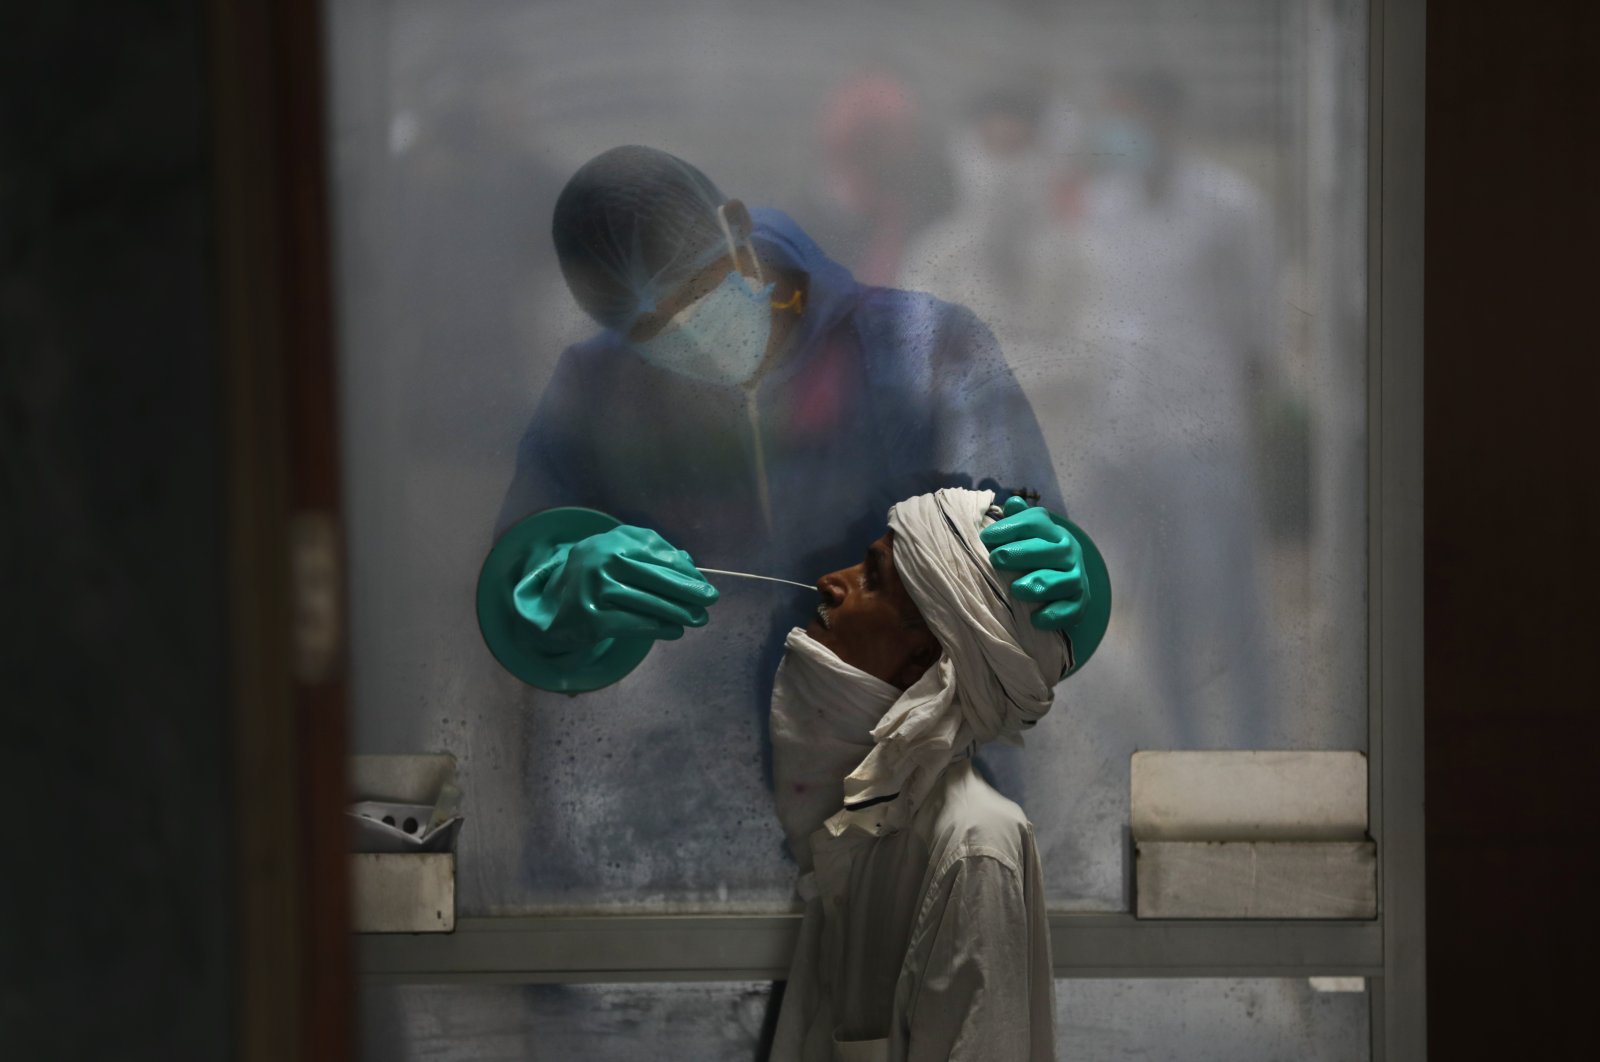 A health worker collects samples for a COVID-19 test at a hospital in New Delhi, India, July 6, 2020. (AP Photo)